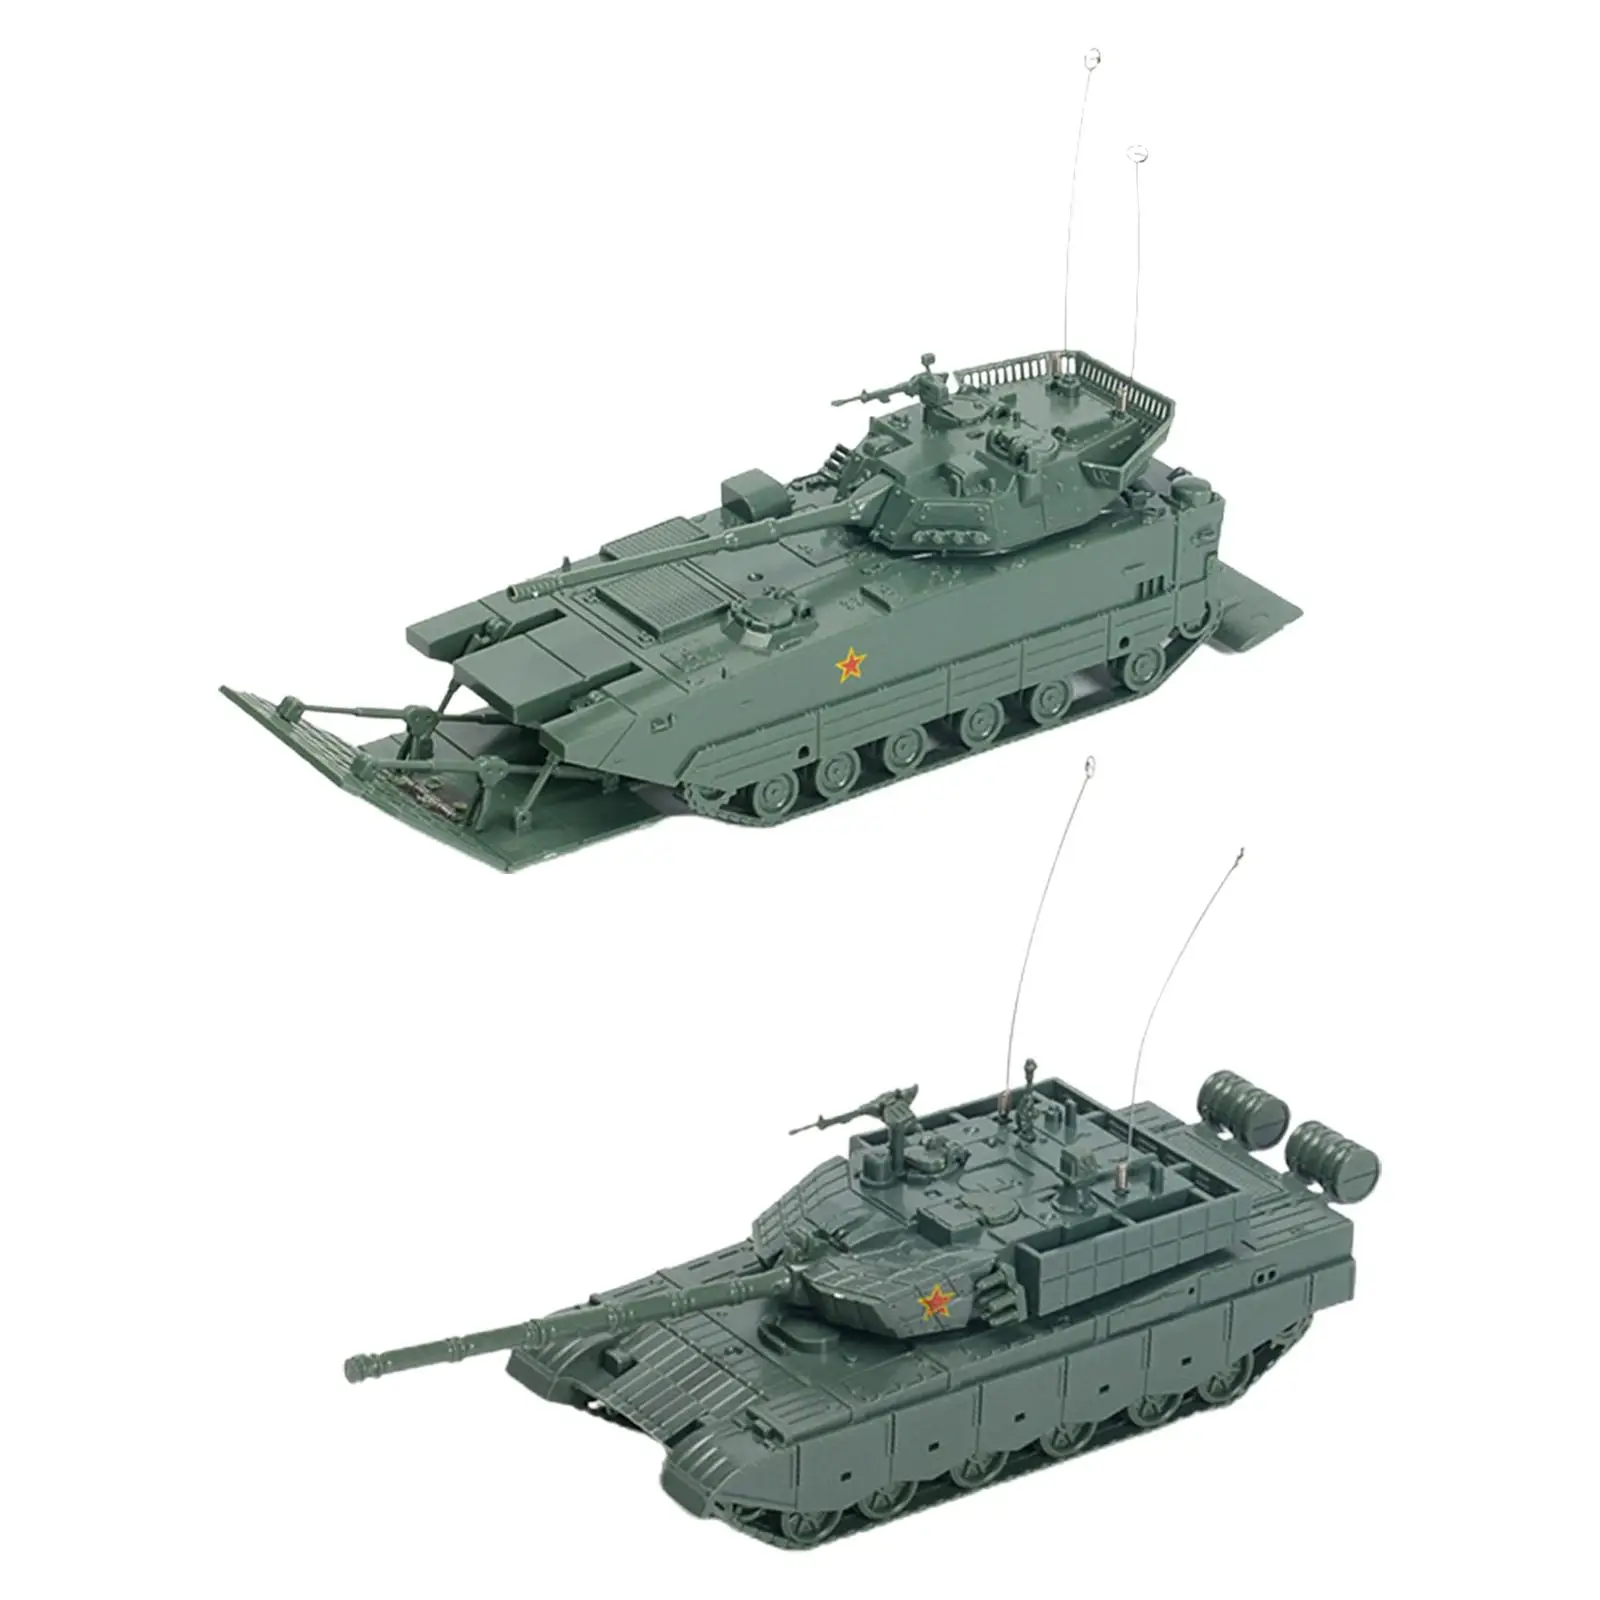 1/72 Puzzles Education Toy 4D Tank Model Assembled Tank Model for Tabletop Decor Collectibles Gift Party Favors Display kids